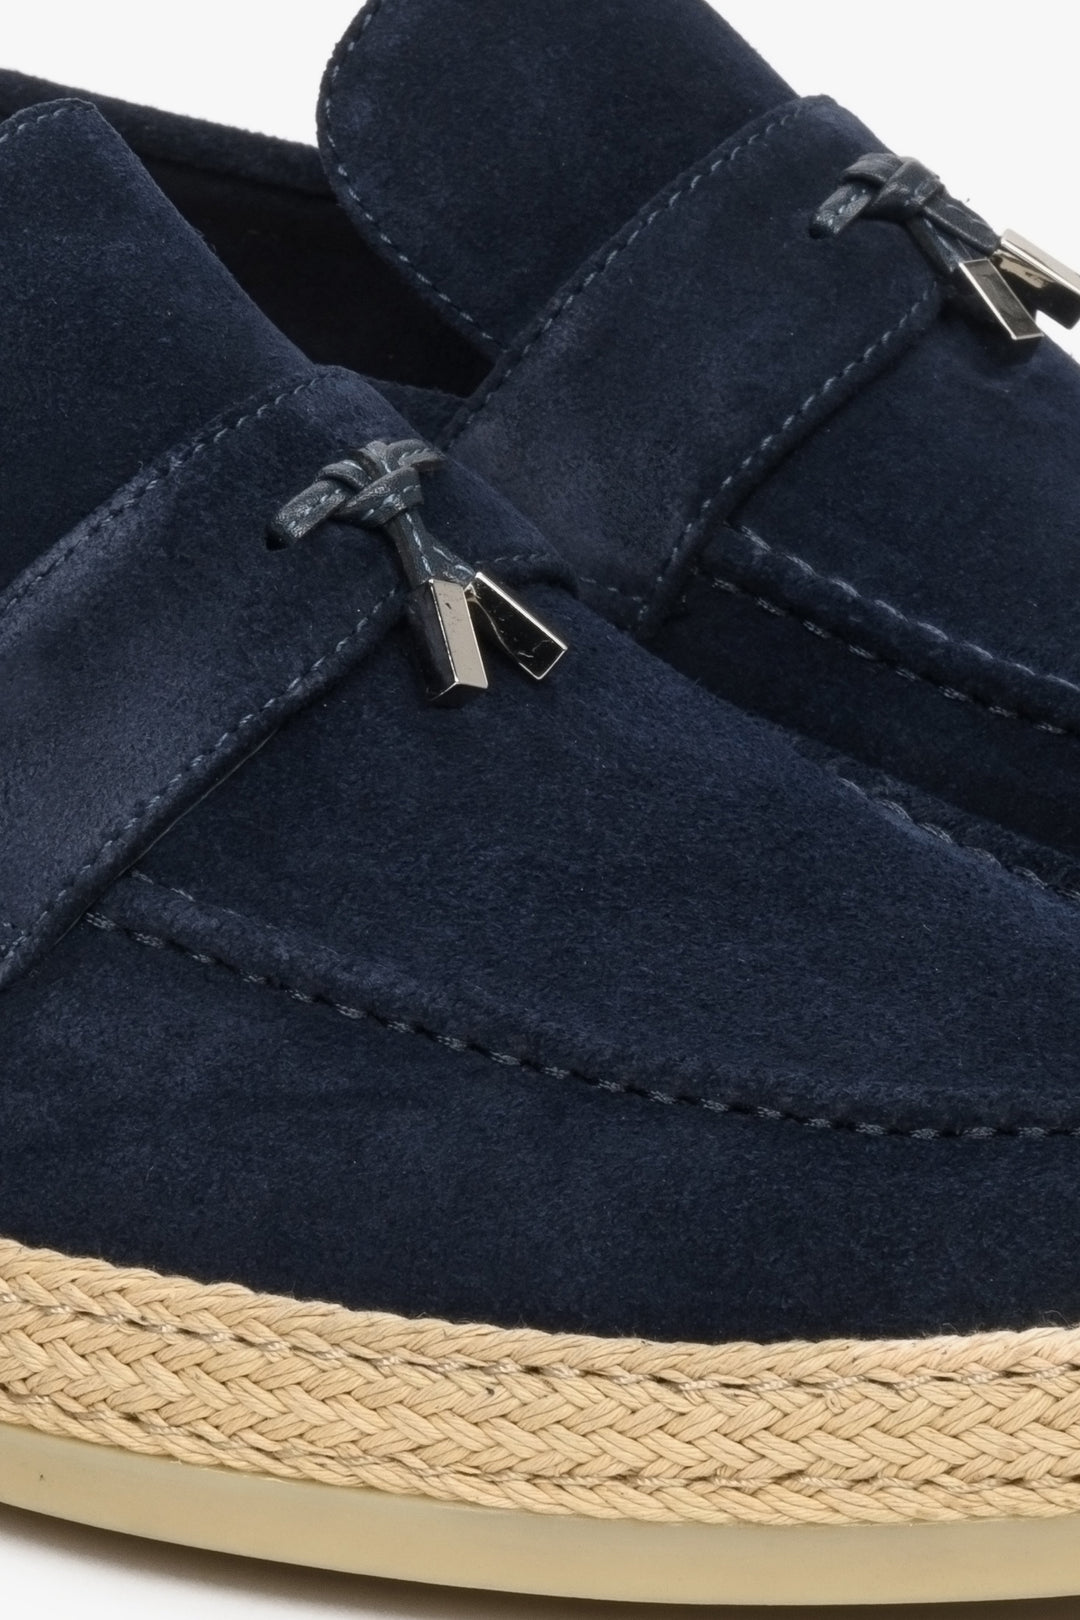 Navy blue men's velour loafers by Estro - close-up on the details.